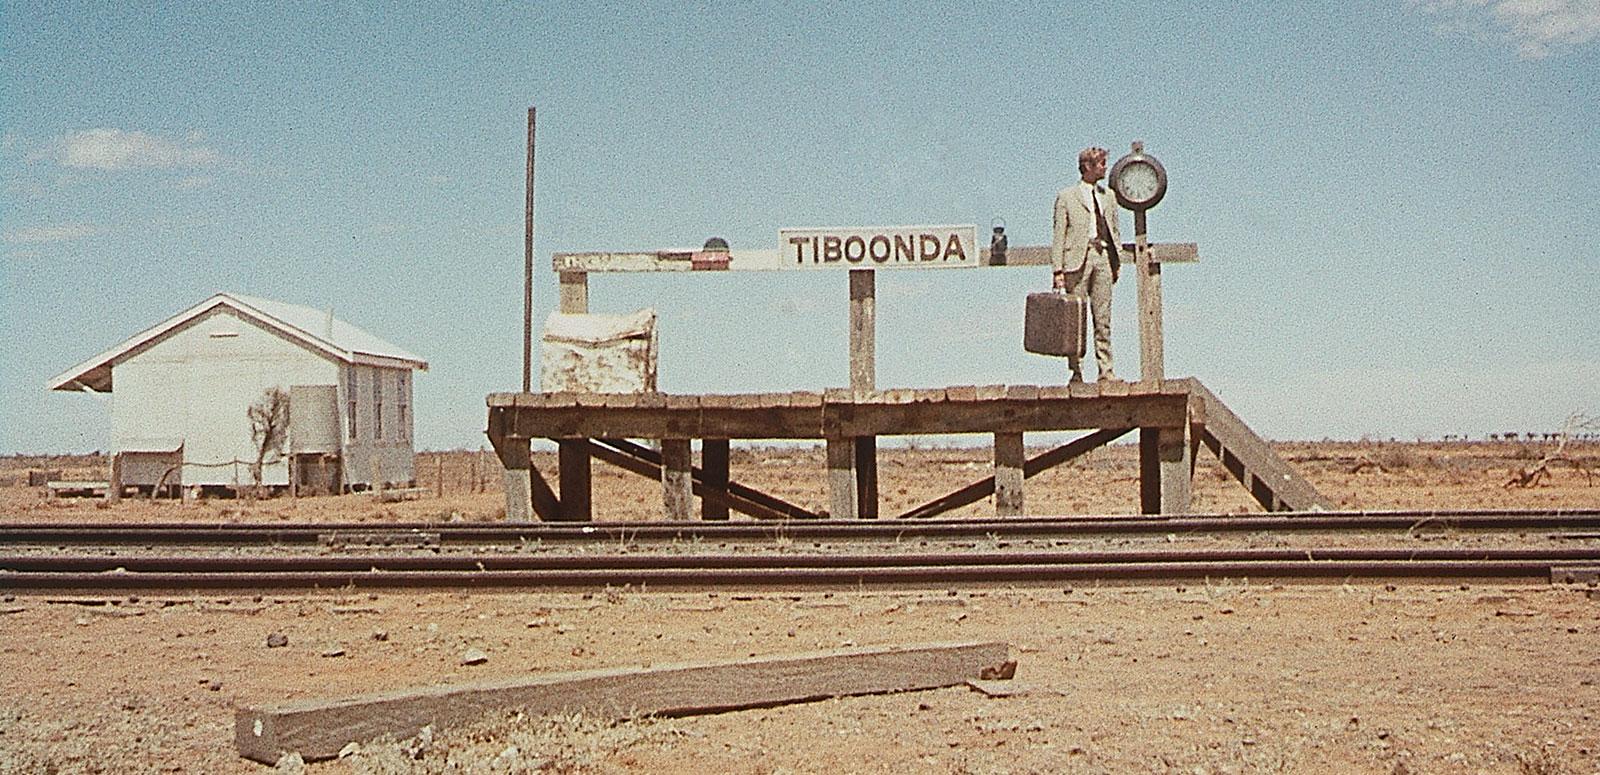 A man carrying a suitcase and wearing a light brown suit waits on a small outback railway platform